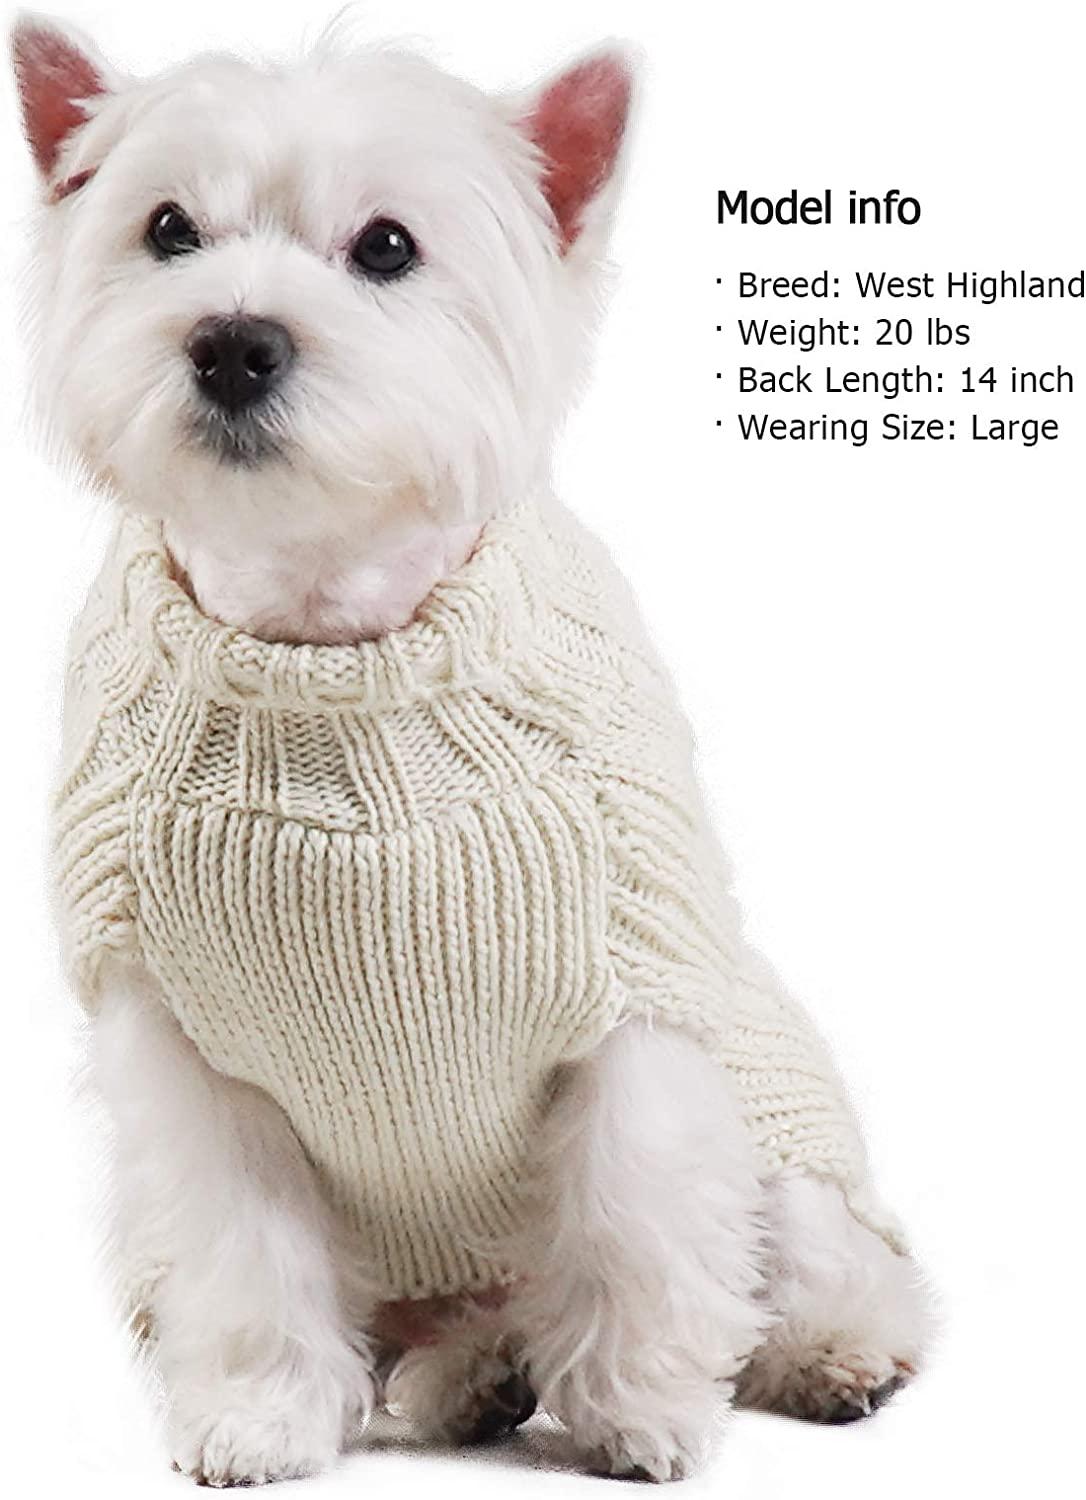 Personalized Cable Knit Dog Sweater